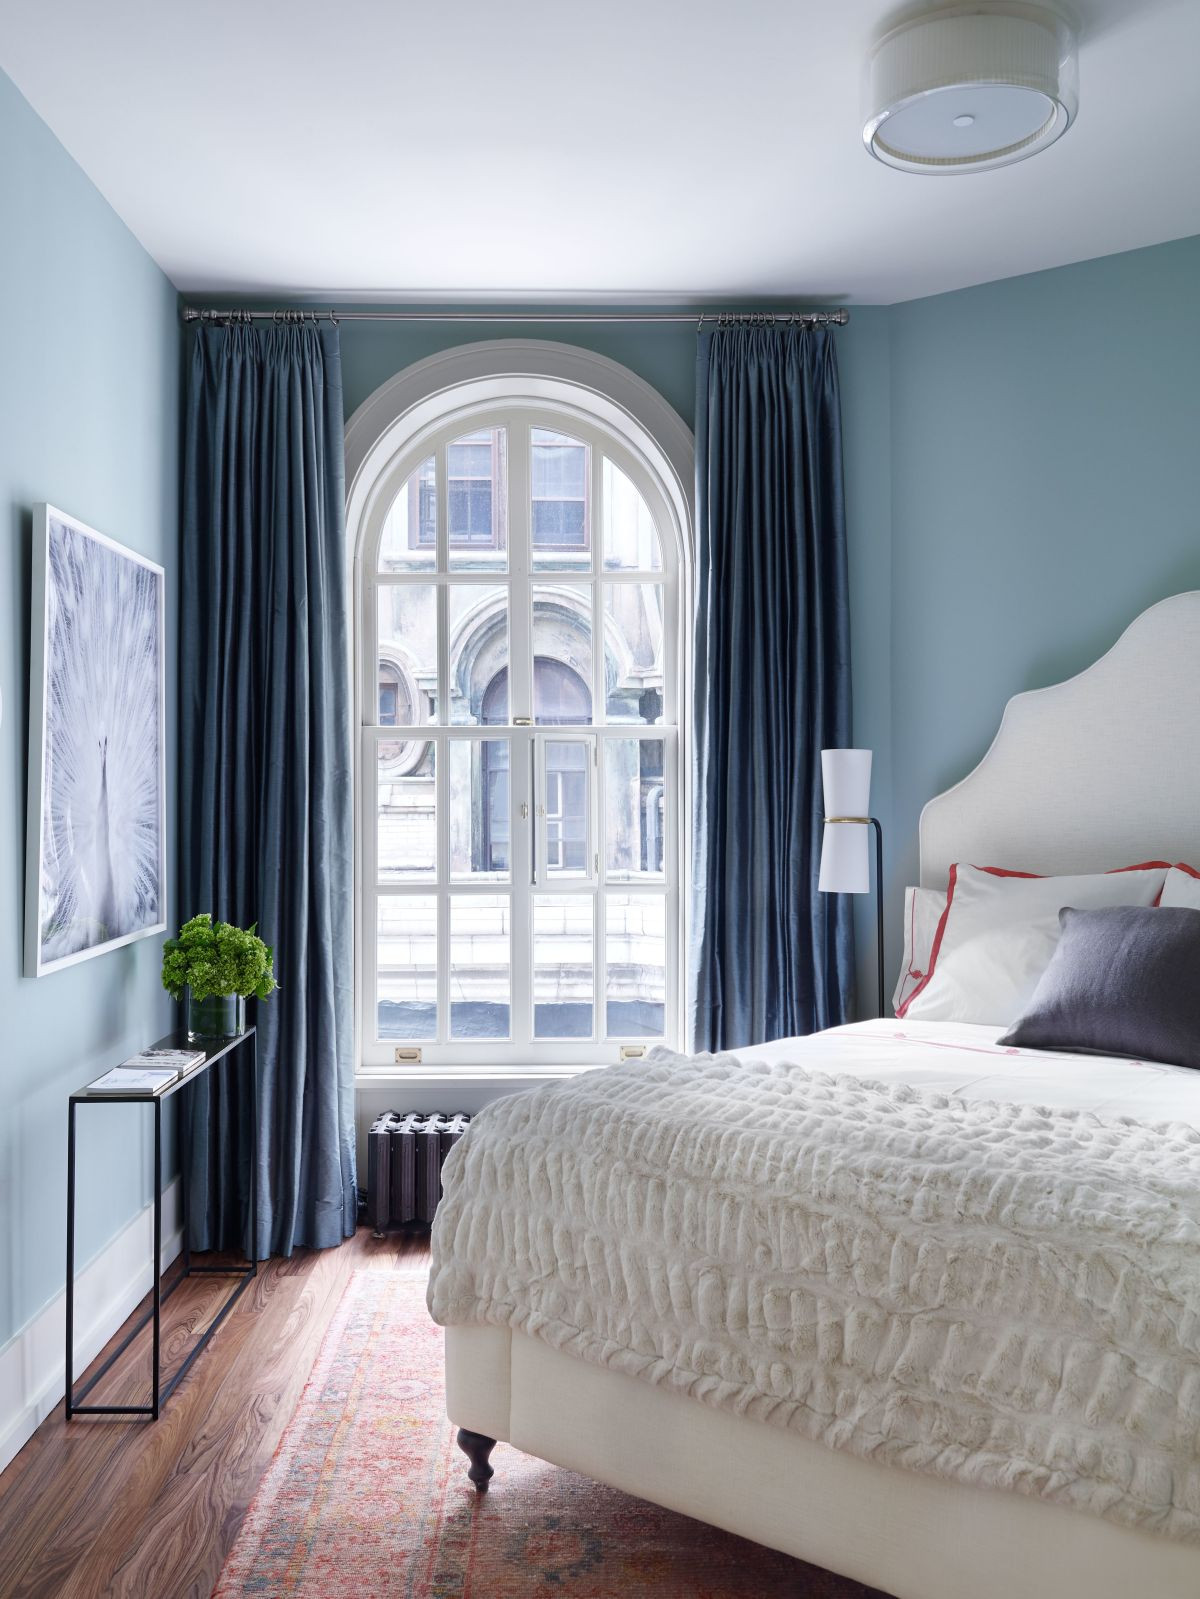 Best Color For Bedroom Walls
 The Four Best Paint Colors For Bedrooms